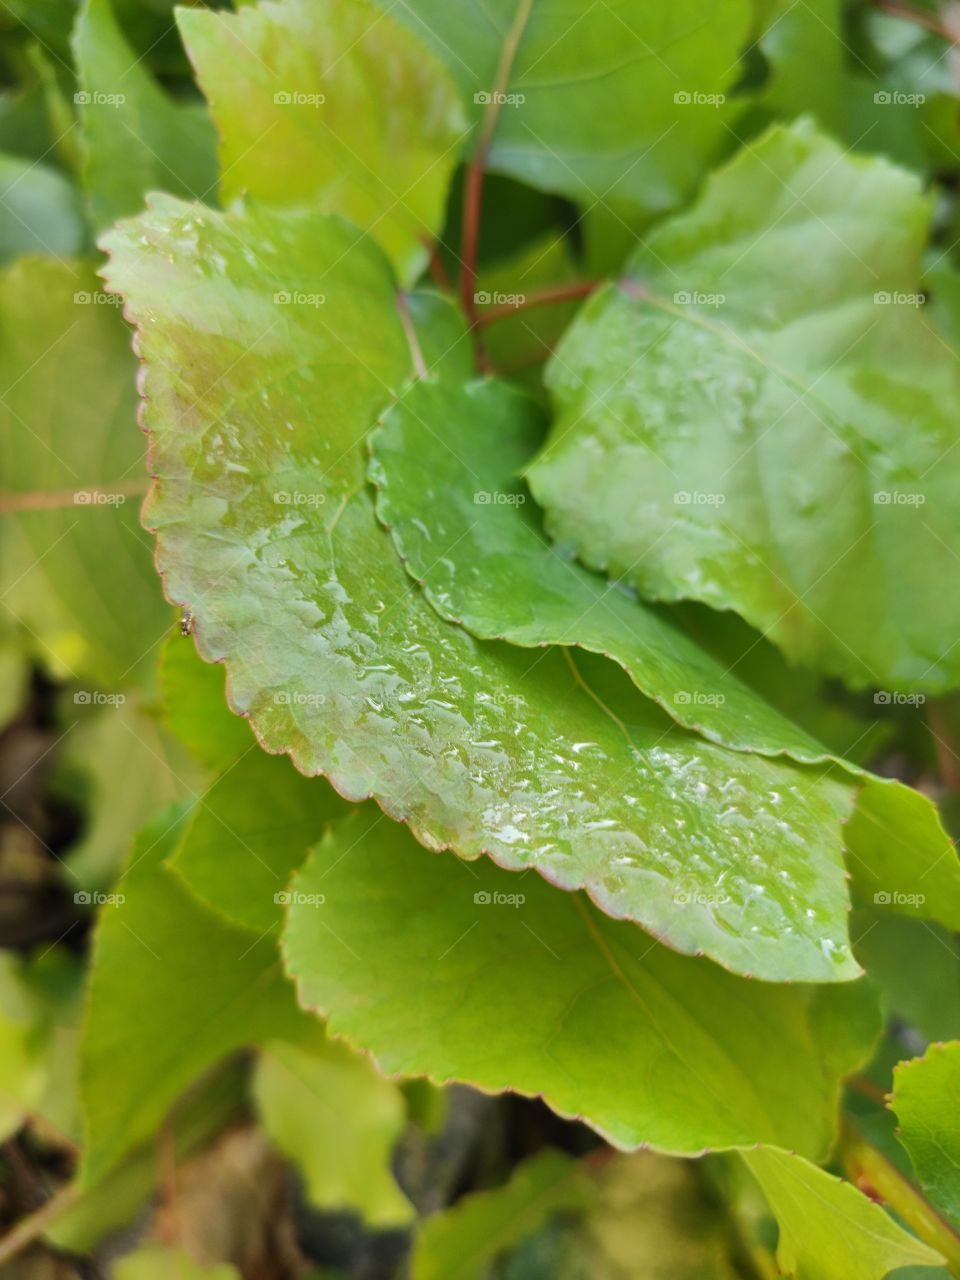 Morning dew on a green leaf in spring morning